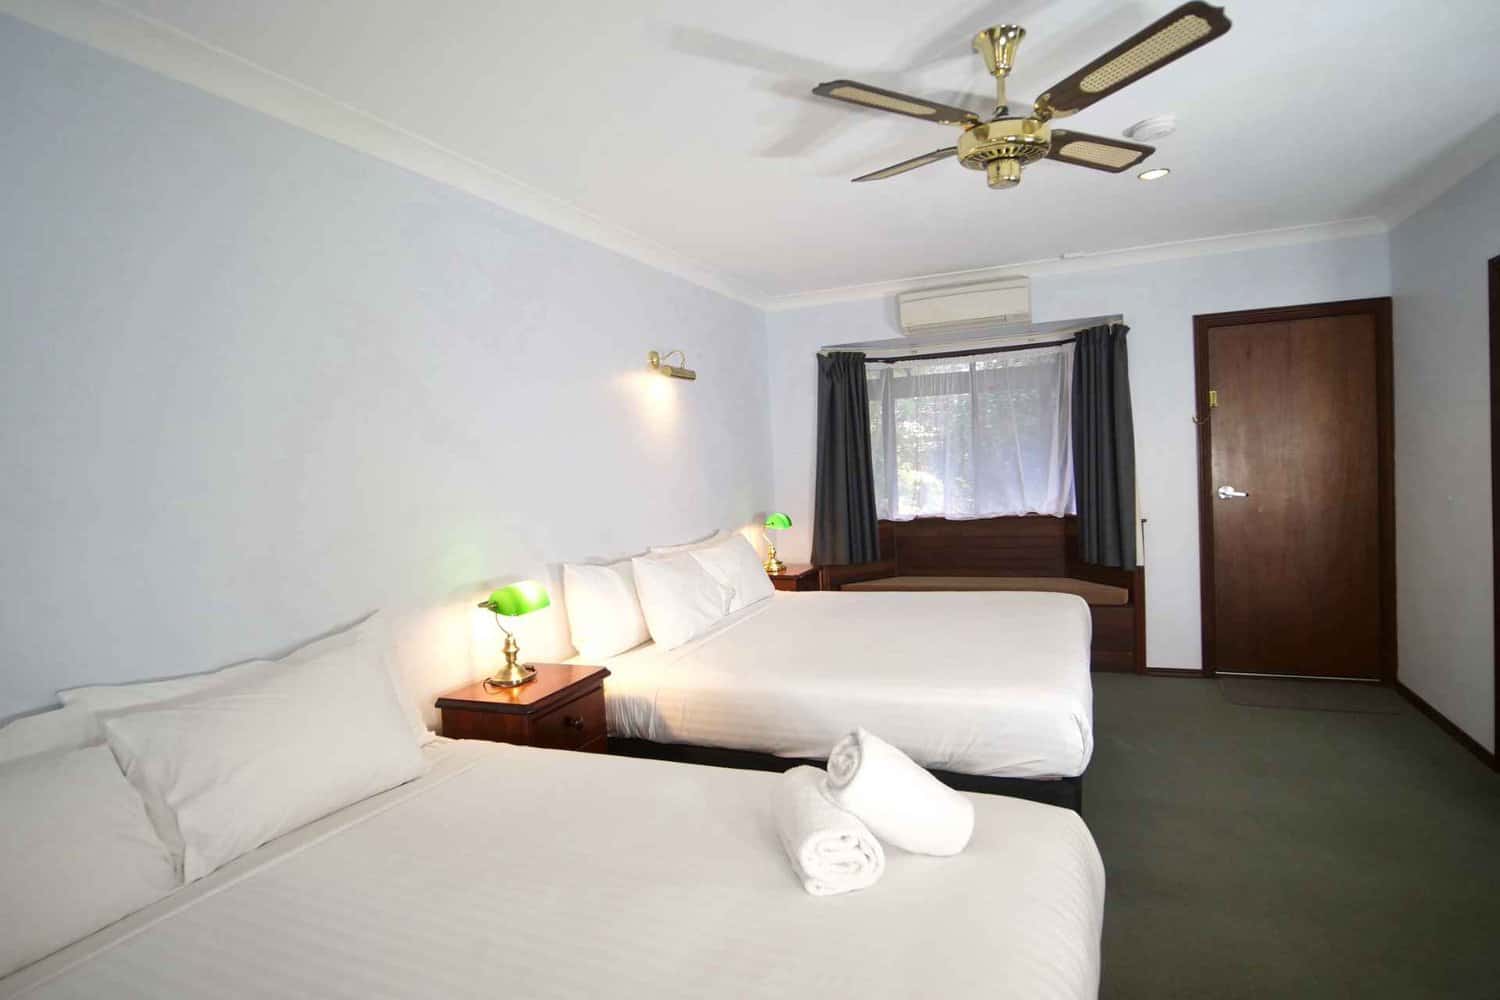 A spacious family room in a hotel with two king-size beds, sunlight streaming through the window, bedside tables with lamps, and towels on the bed, providing a comfortable stay for guests who have made their hotel deposit.